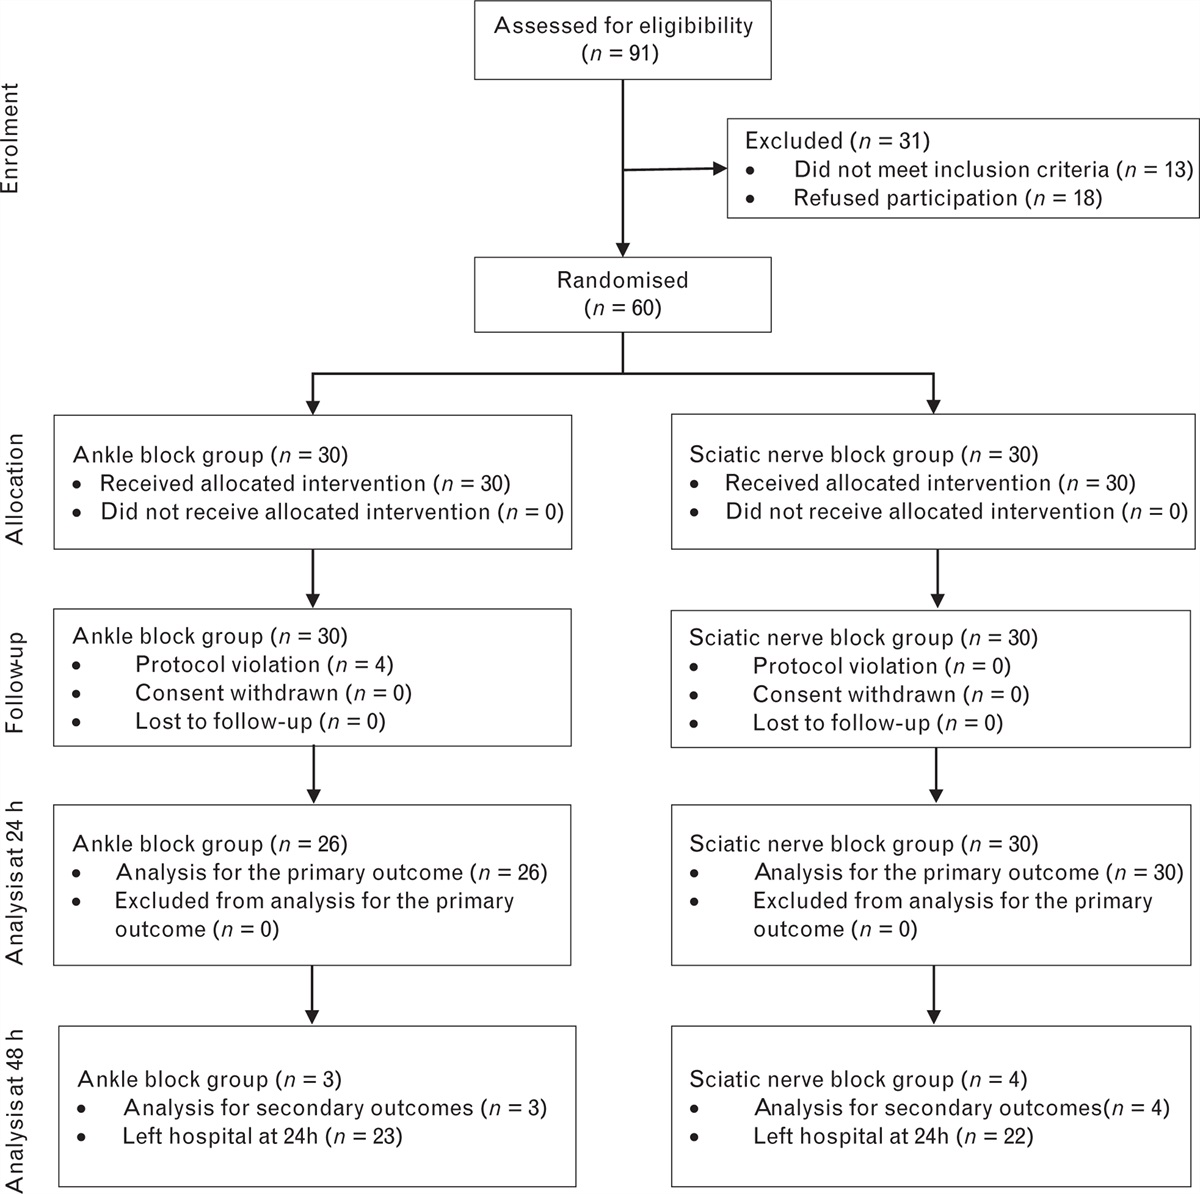 Duration of analgesia after forefoot surgery compared between an ankle and a sciatic nerve block at the popliteal crease: A randomised controlled single-blinded trial